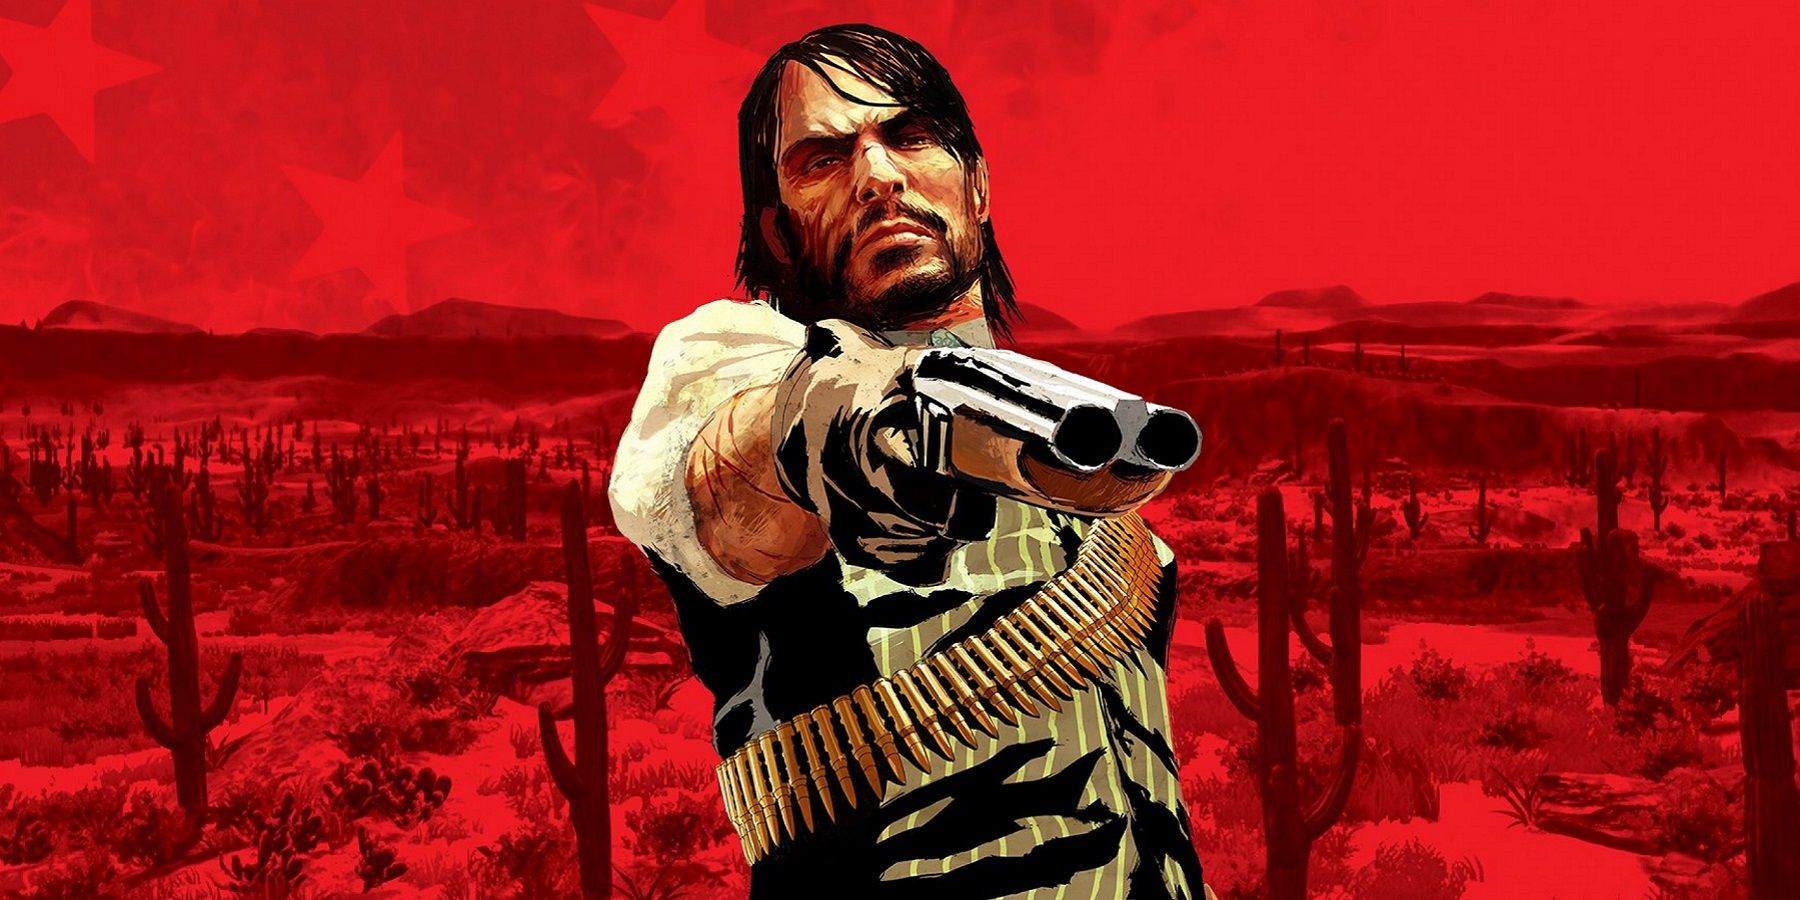 Image from Red Dead Redemption showing John Marston on a red background.